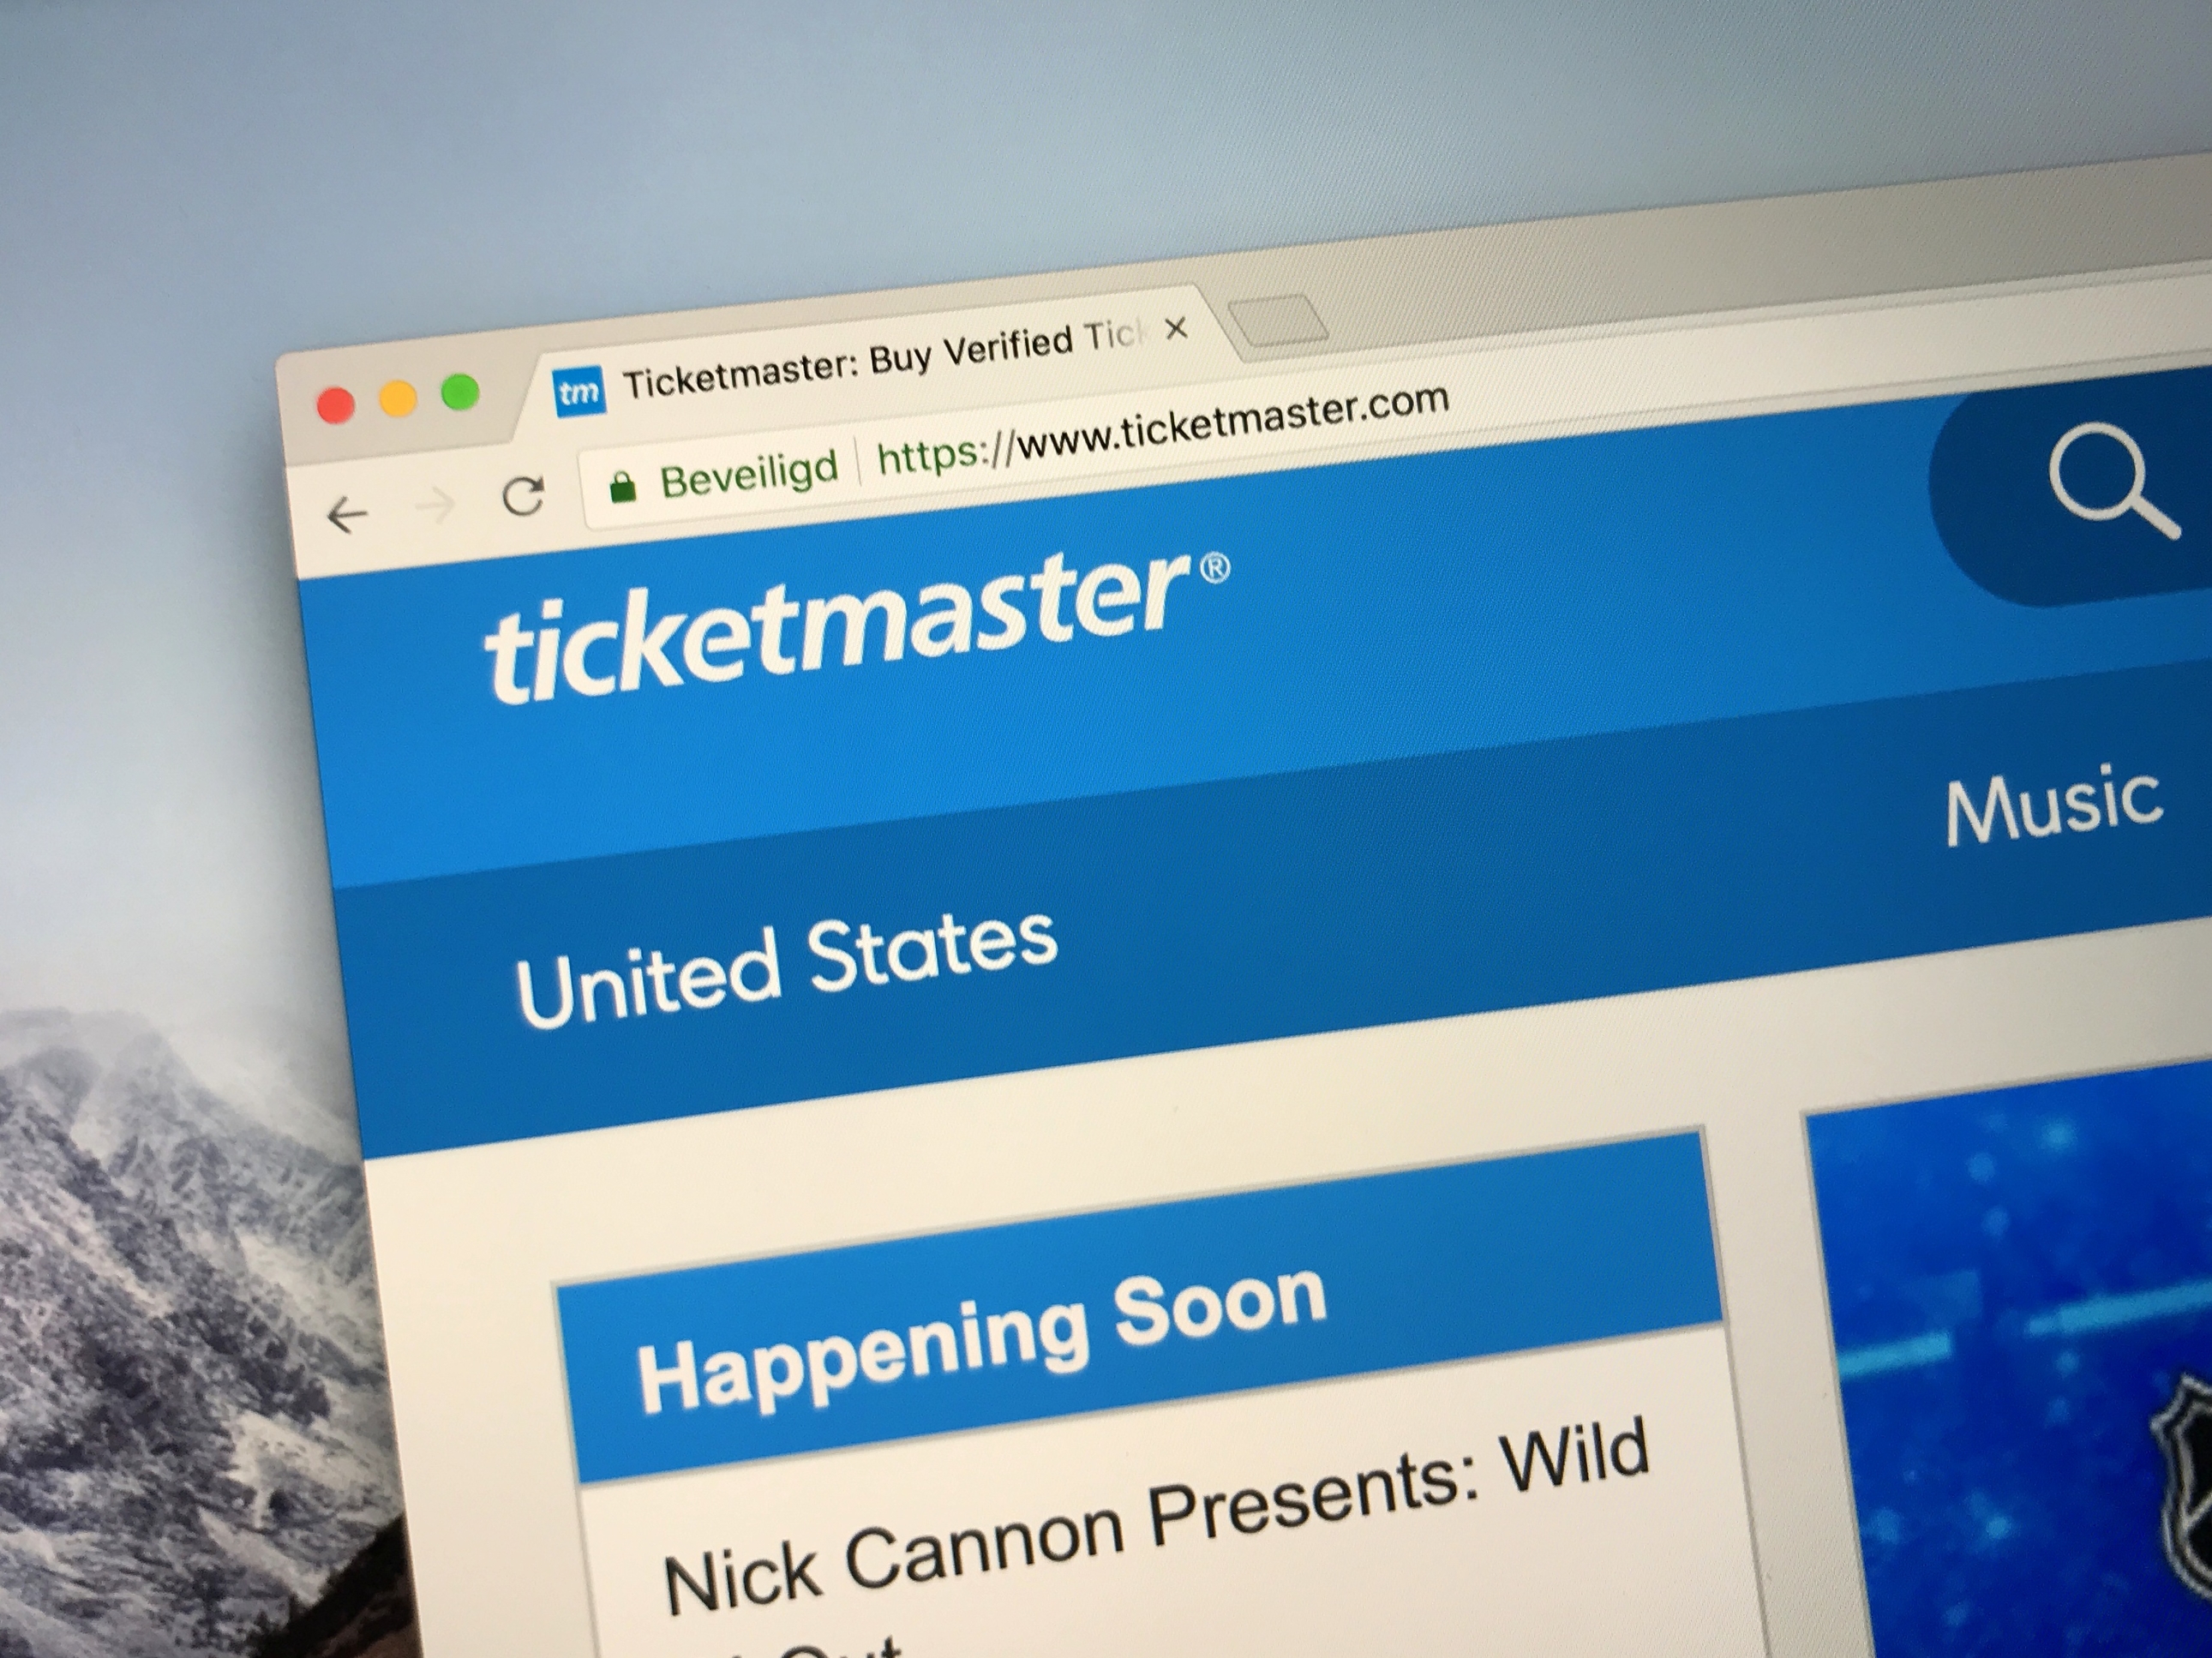 Ticketmaster promo code: Buy one ticket, get one FREE